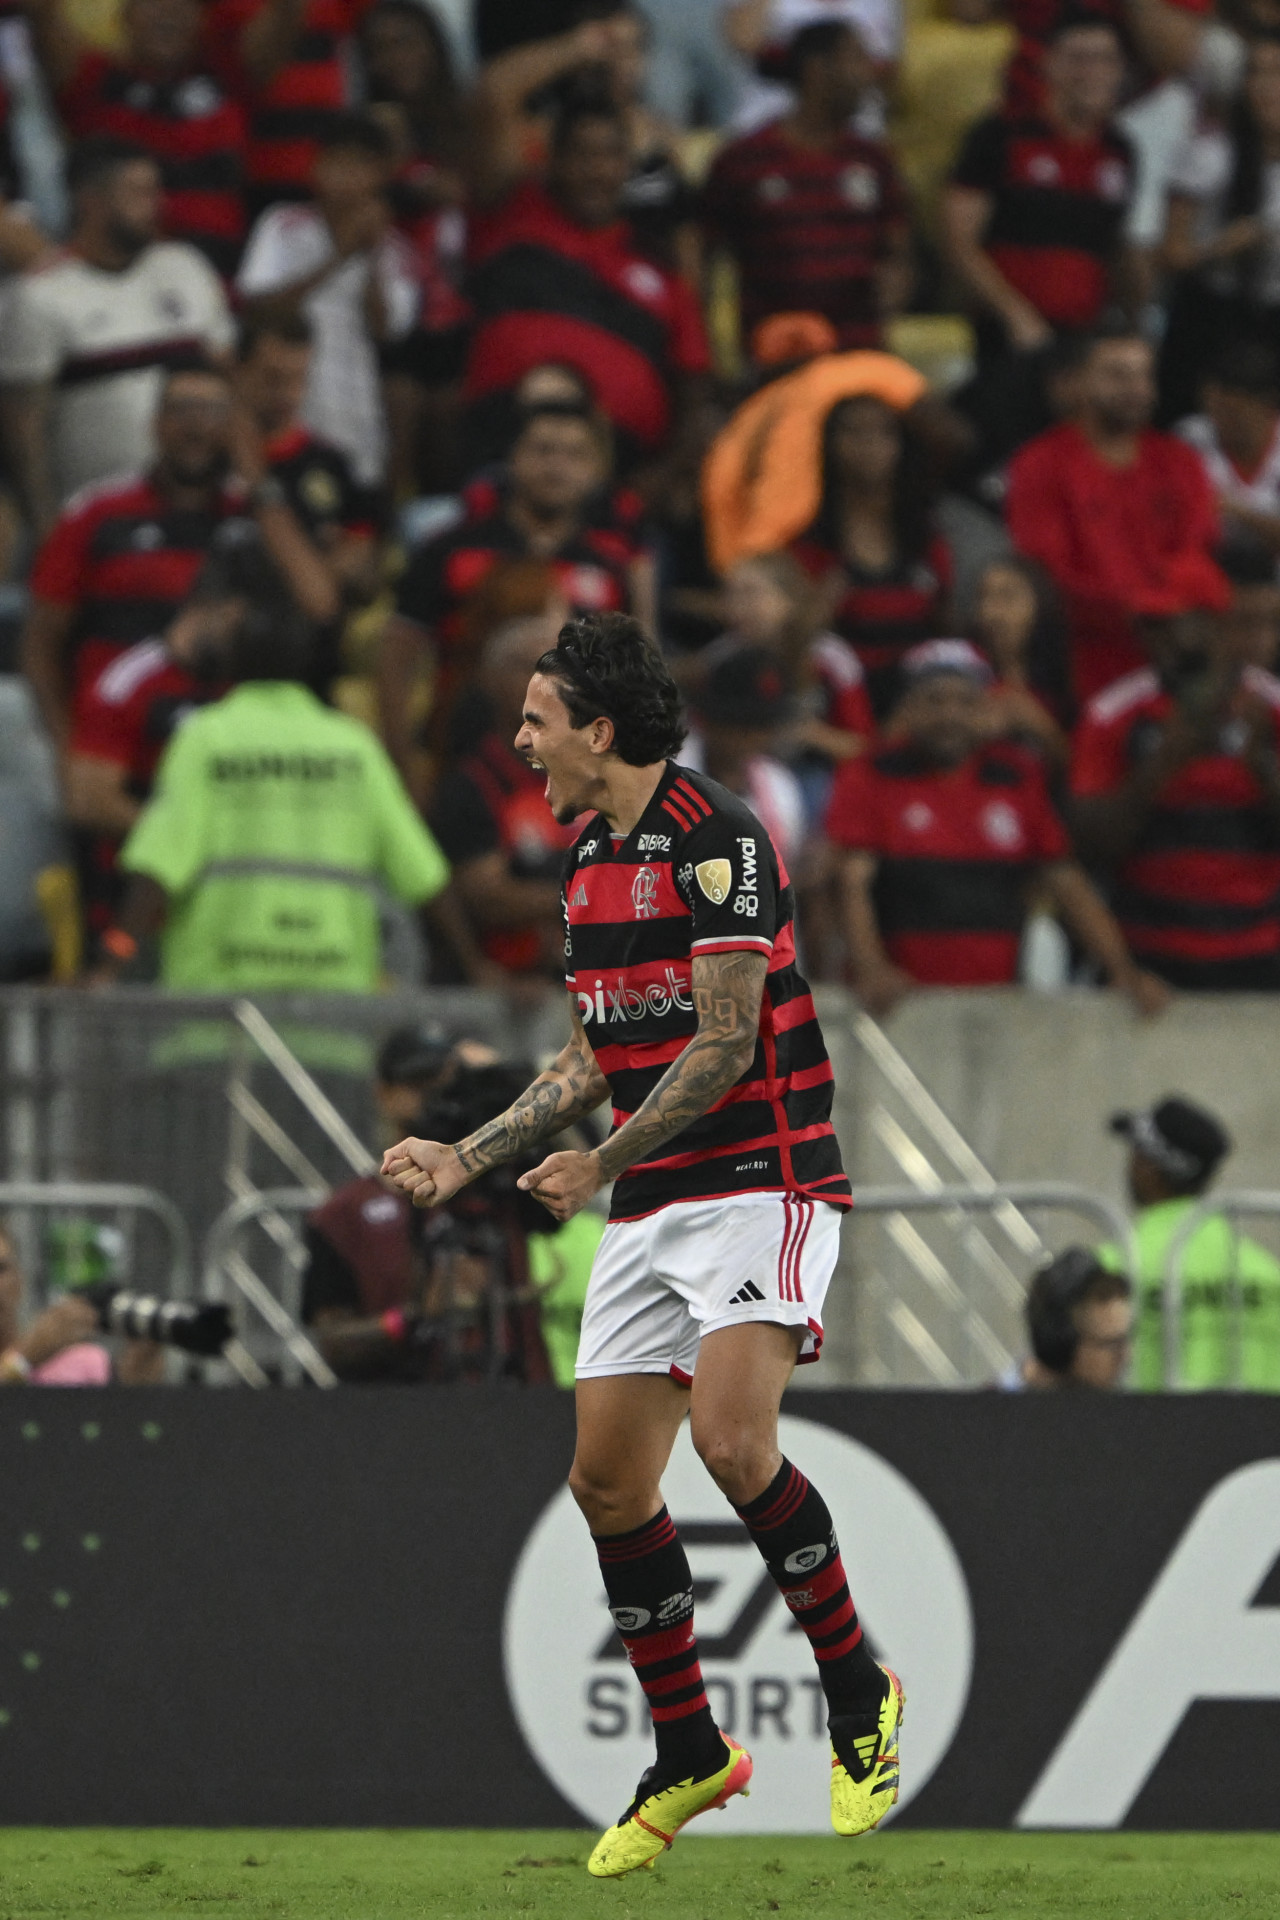 Flamengo\'s forward Pedro celebrates after scoringduring the Copa Libertadores group stage first leg football match between Brazil\'s Flamengo and Chile\'s Palestino at the Maracana Stadium in Rio de Janeiro, Brazil, on April 10, 2024.
MAURO PIMENTEL / AFP